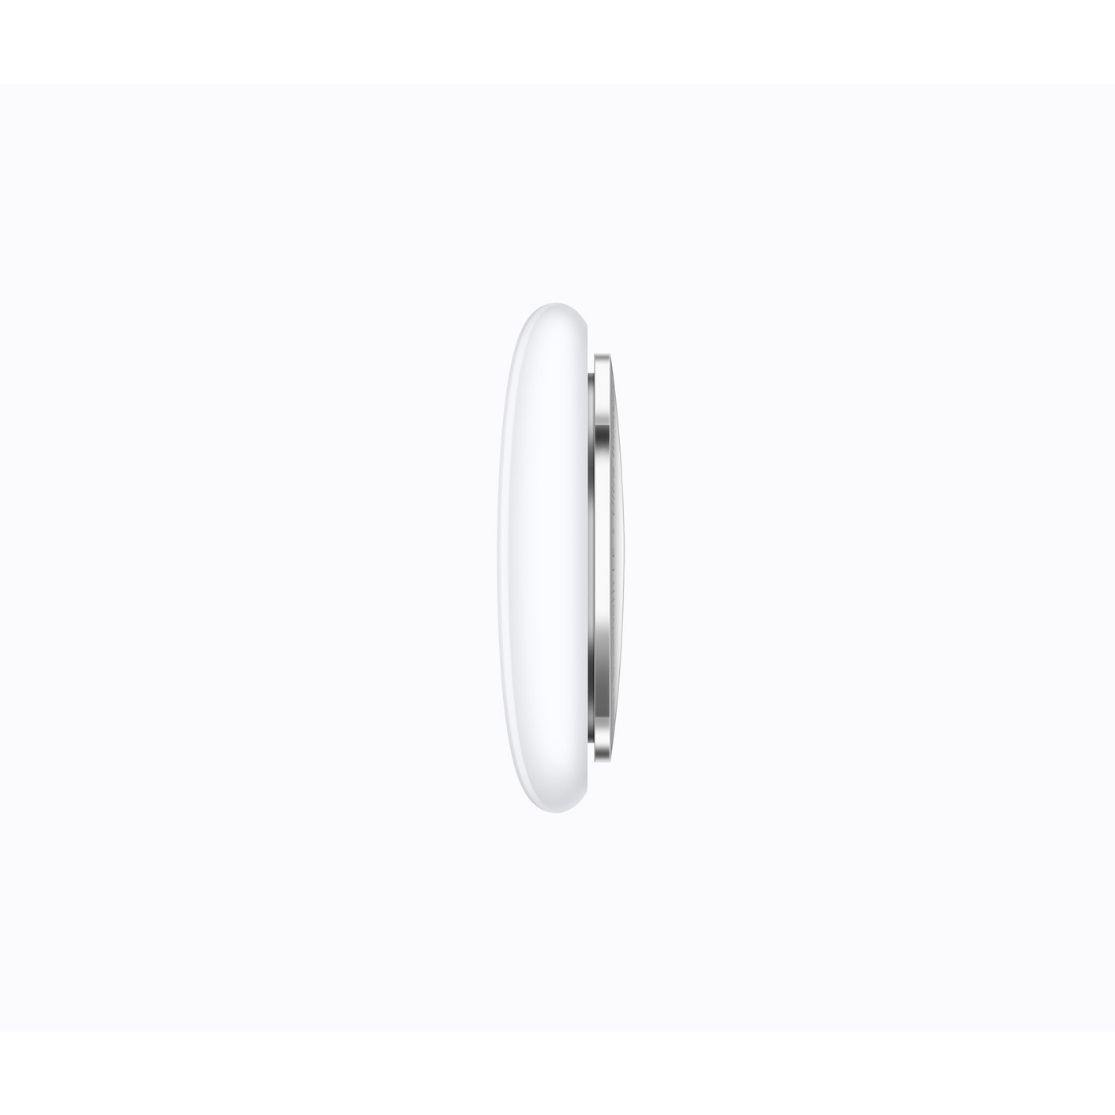 Apple AirTag (1 Pack & 4 Pack) - QuickTech.in